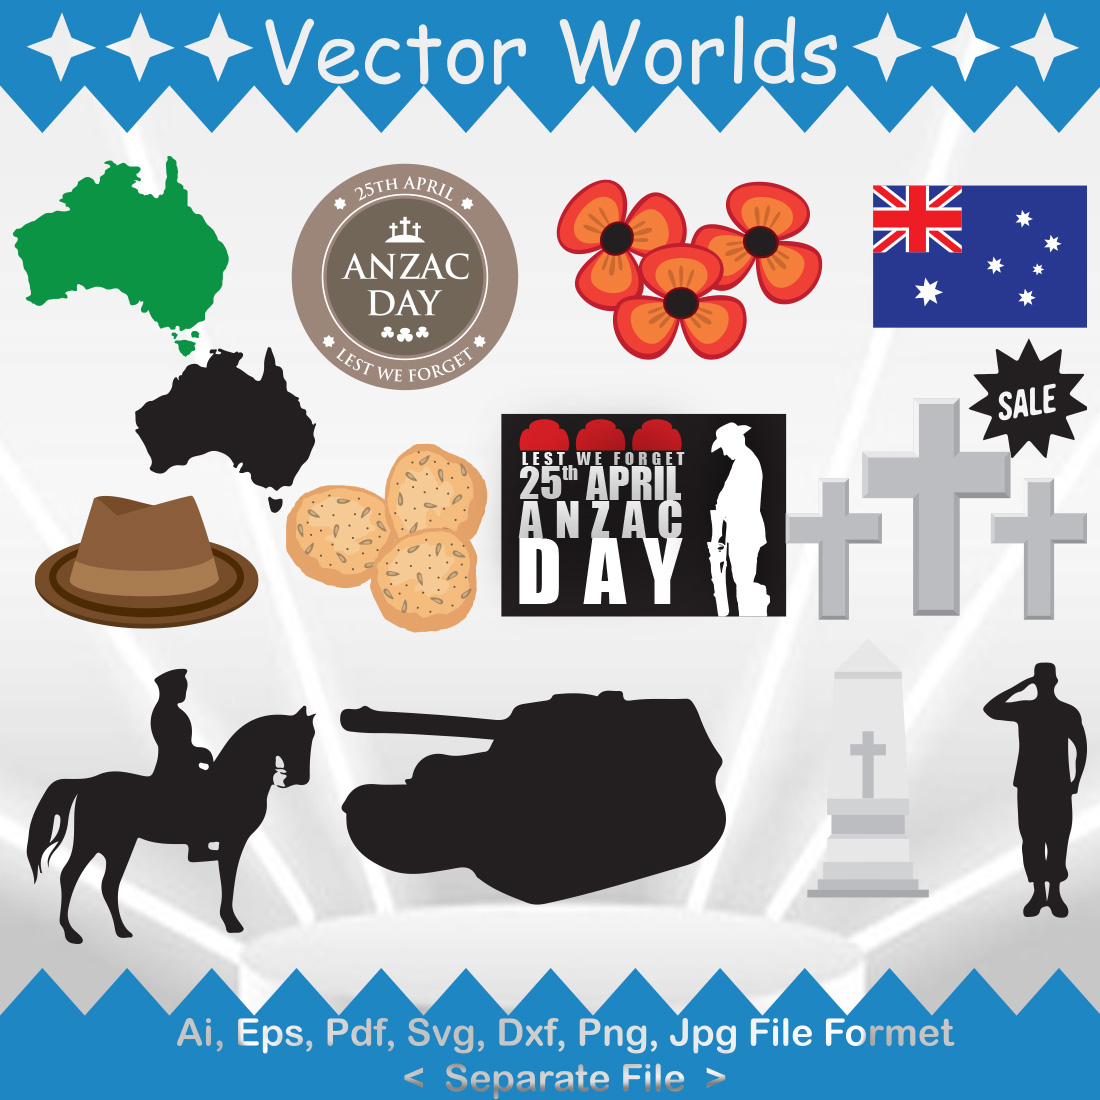 ANZAC Day SVG Vector Design cover image.